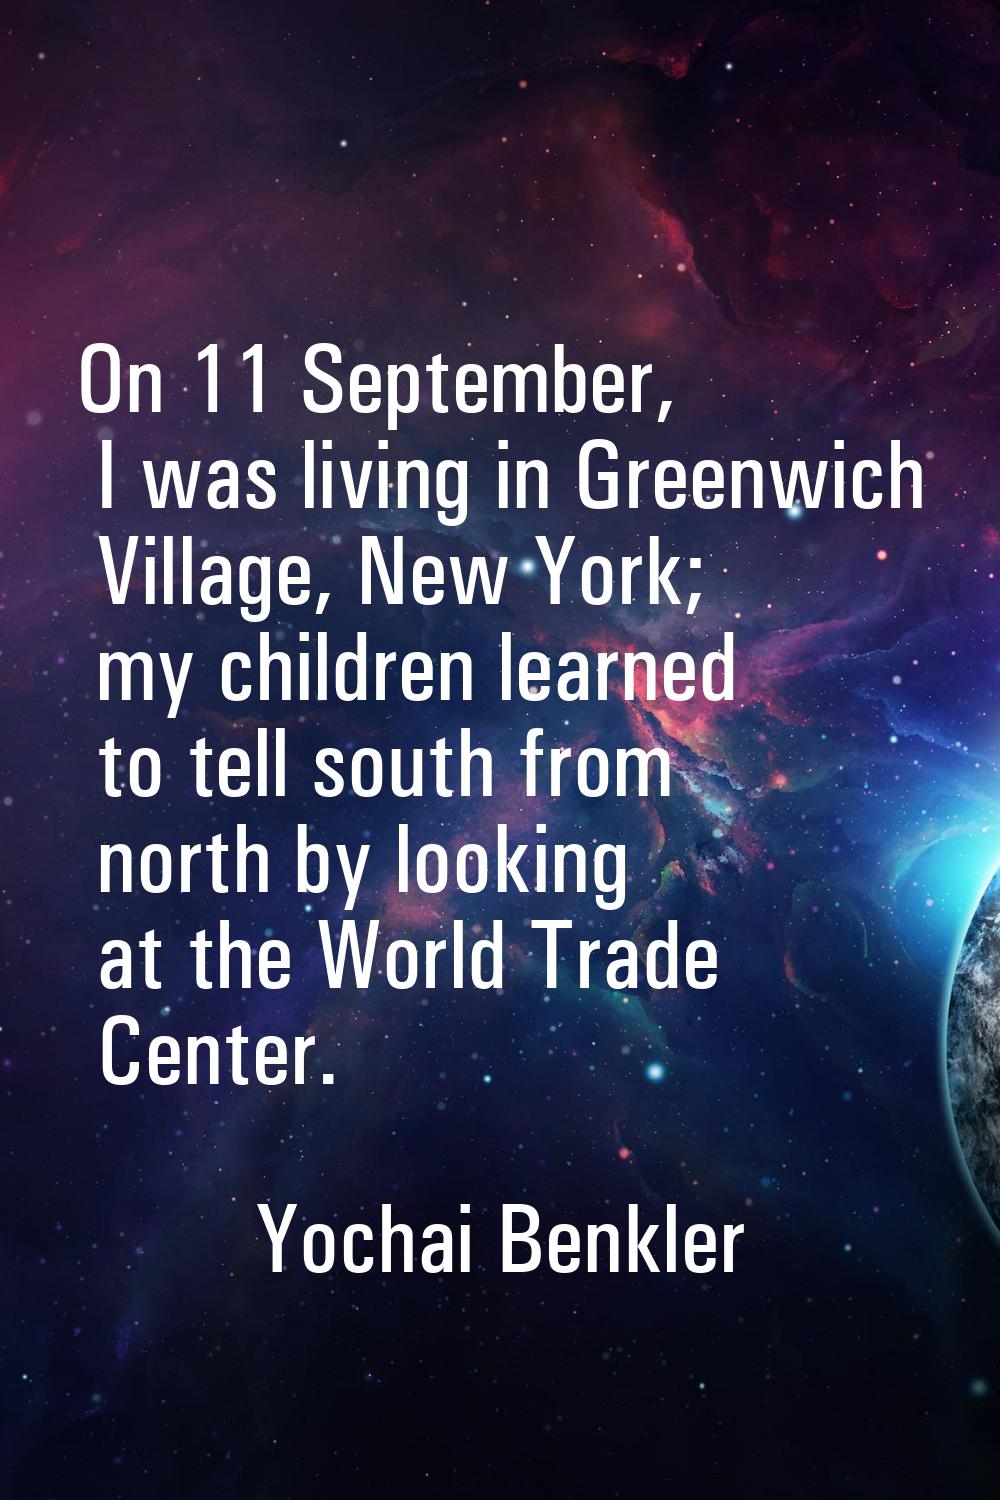 On 11 September, I was living in Greenwich Village, New York; my children learned to tell south fro